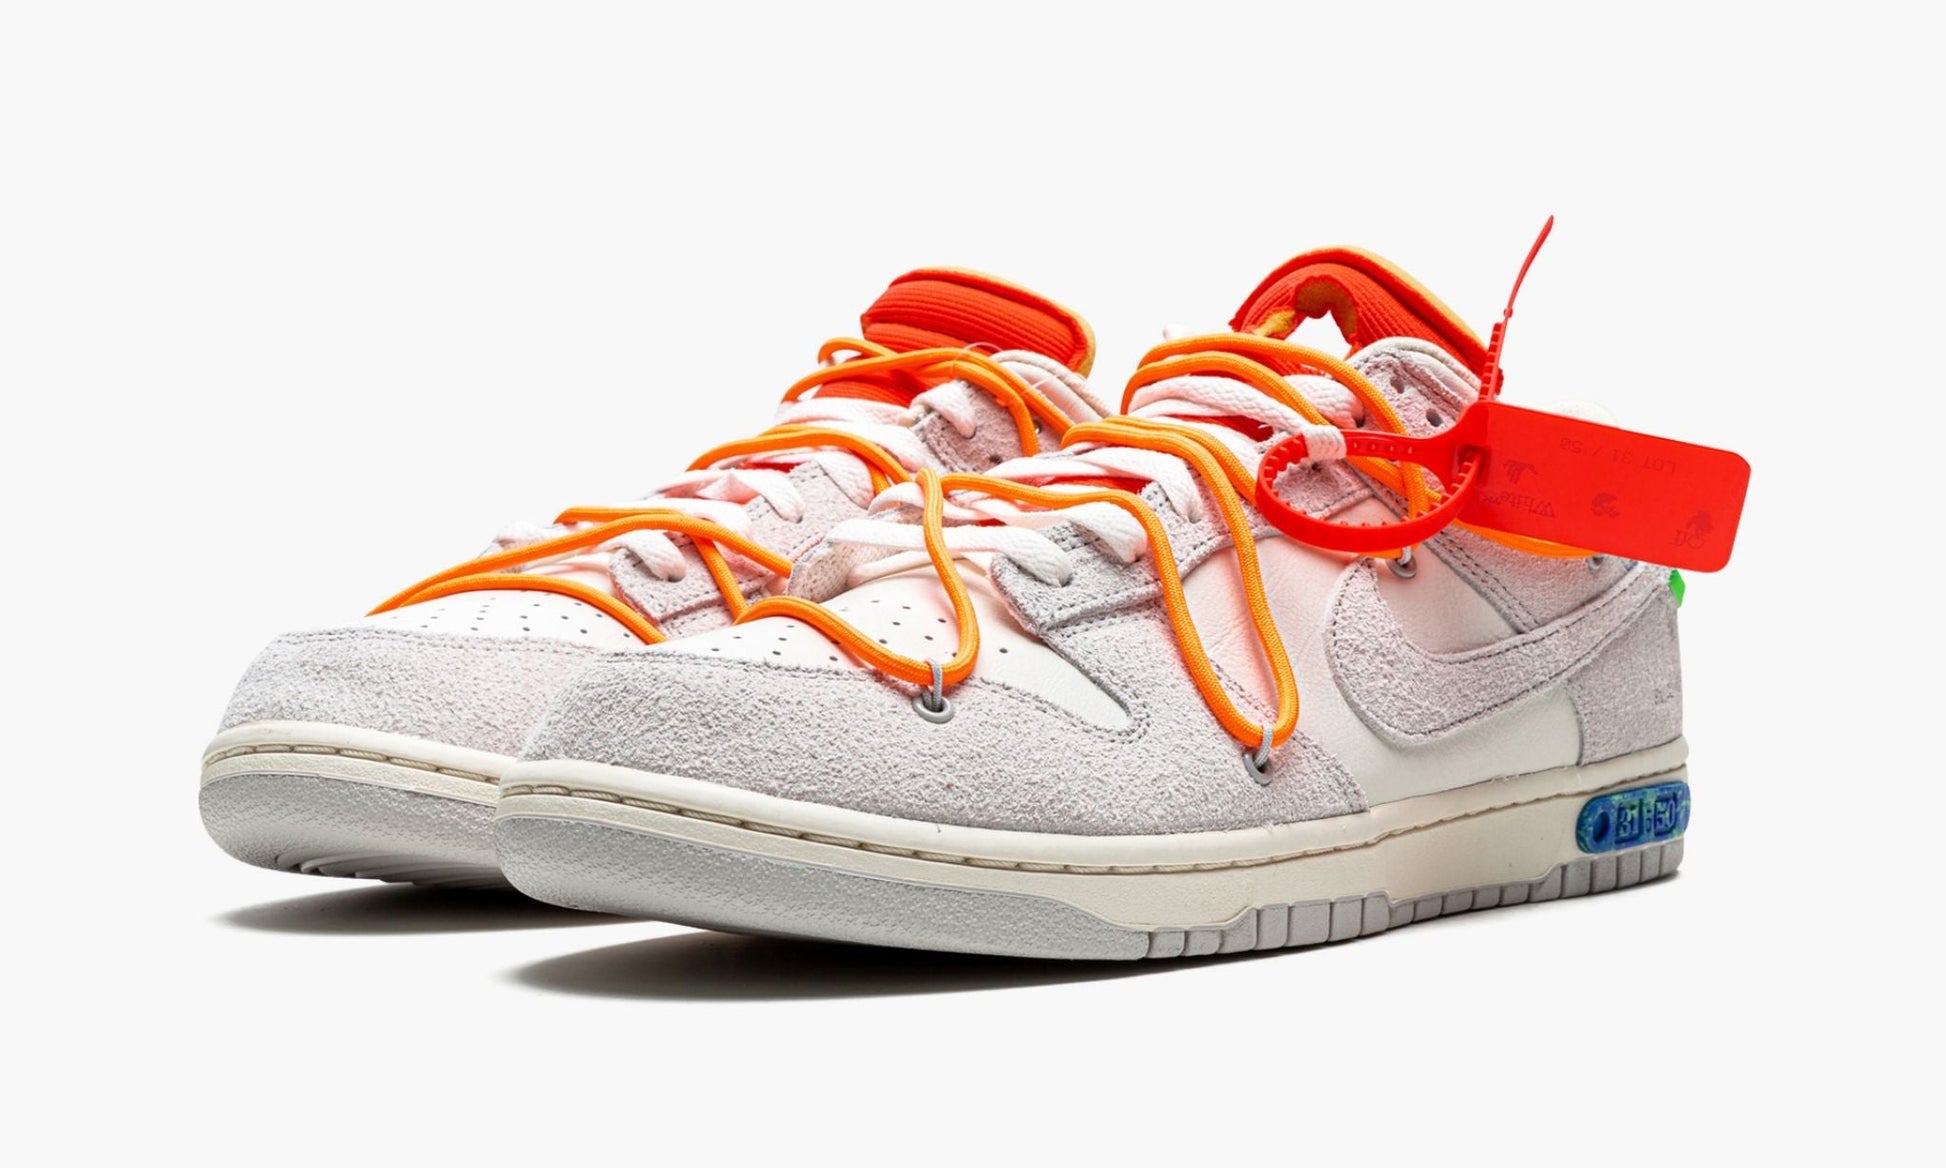 DUNK LOW OFF-WHITE "Off-White - Lot 31"